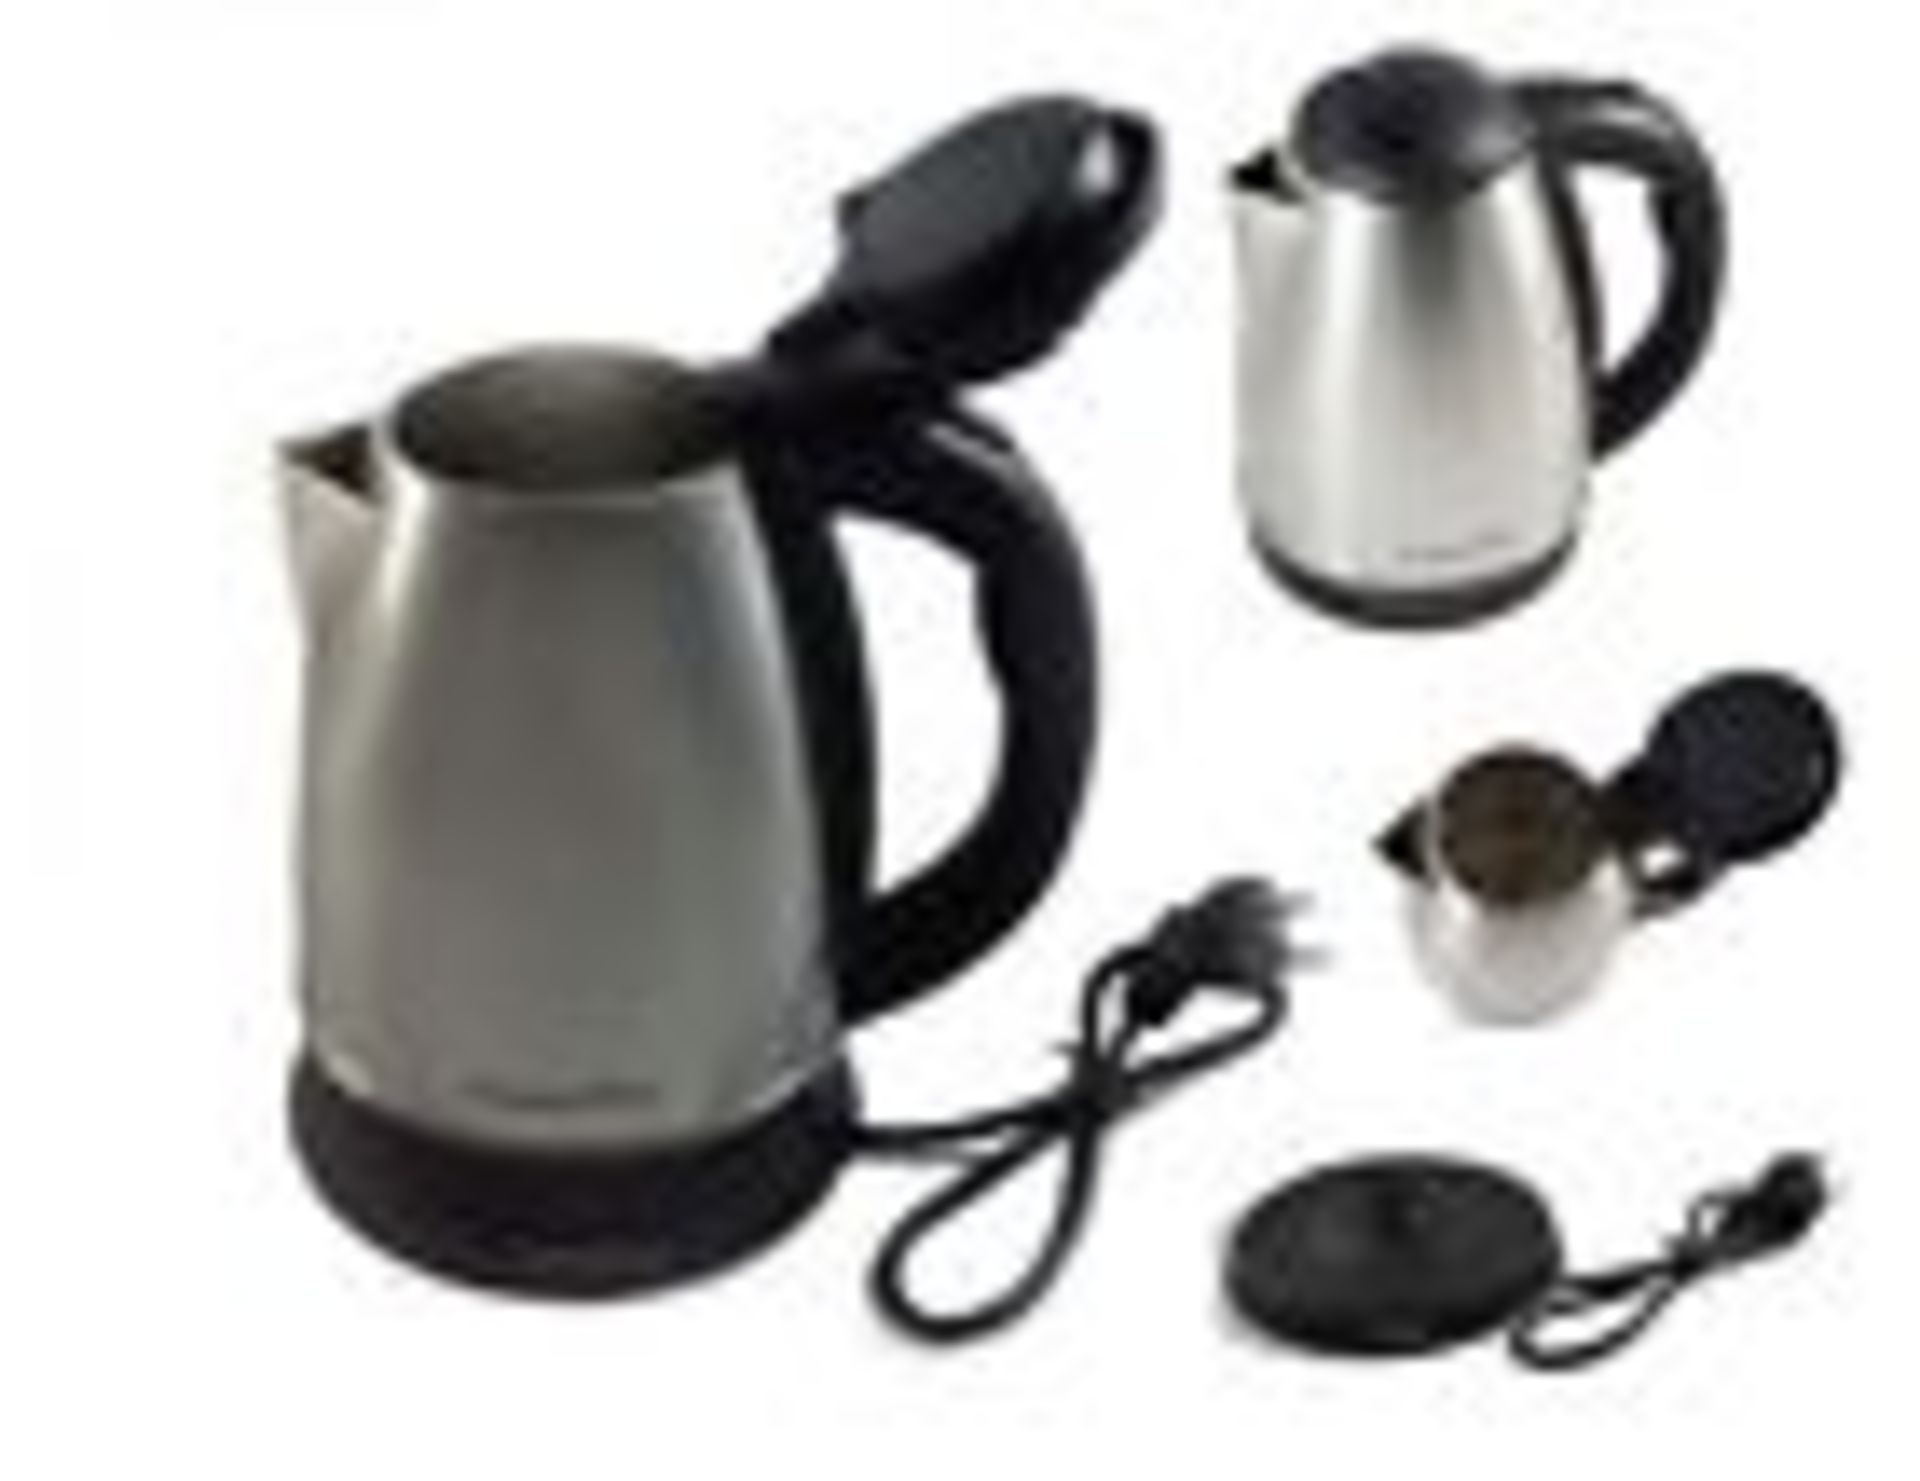 V *TRADE QTY* Brand New High Quality 1.8 litre Stainless Steel Water Kettle With Cord Storage And